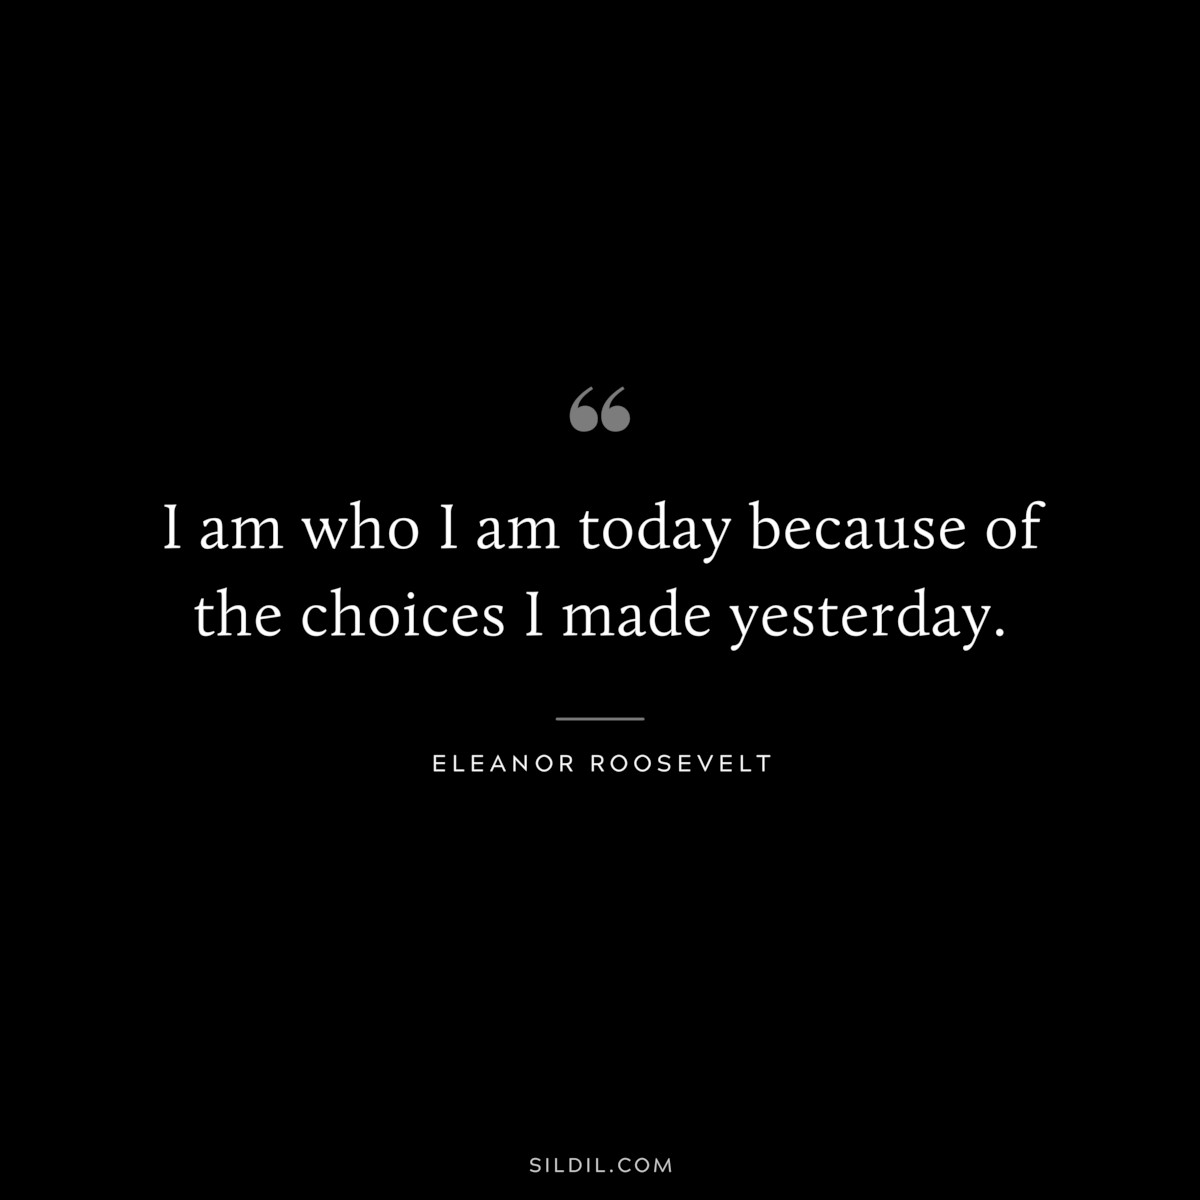 I am who I am today because of the choices I made yesterday. ― Eleanor Roosevelt